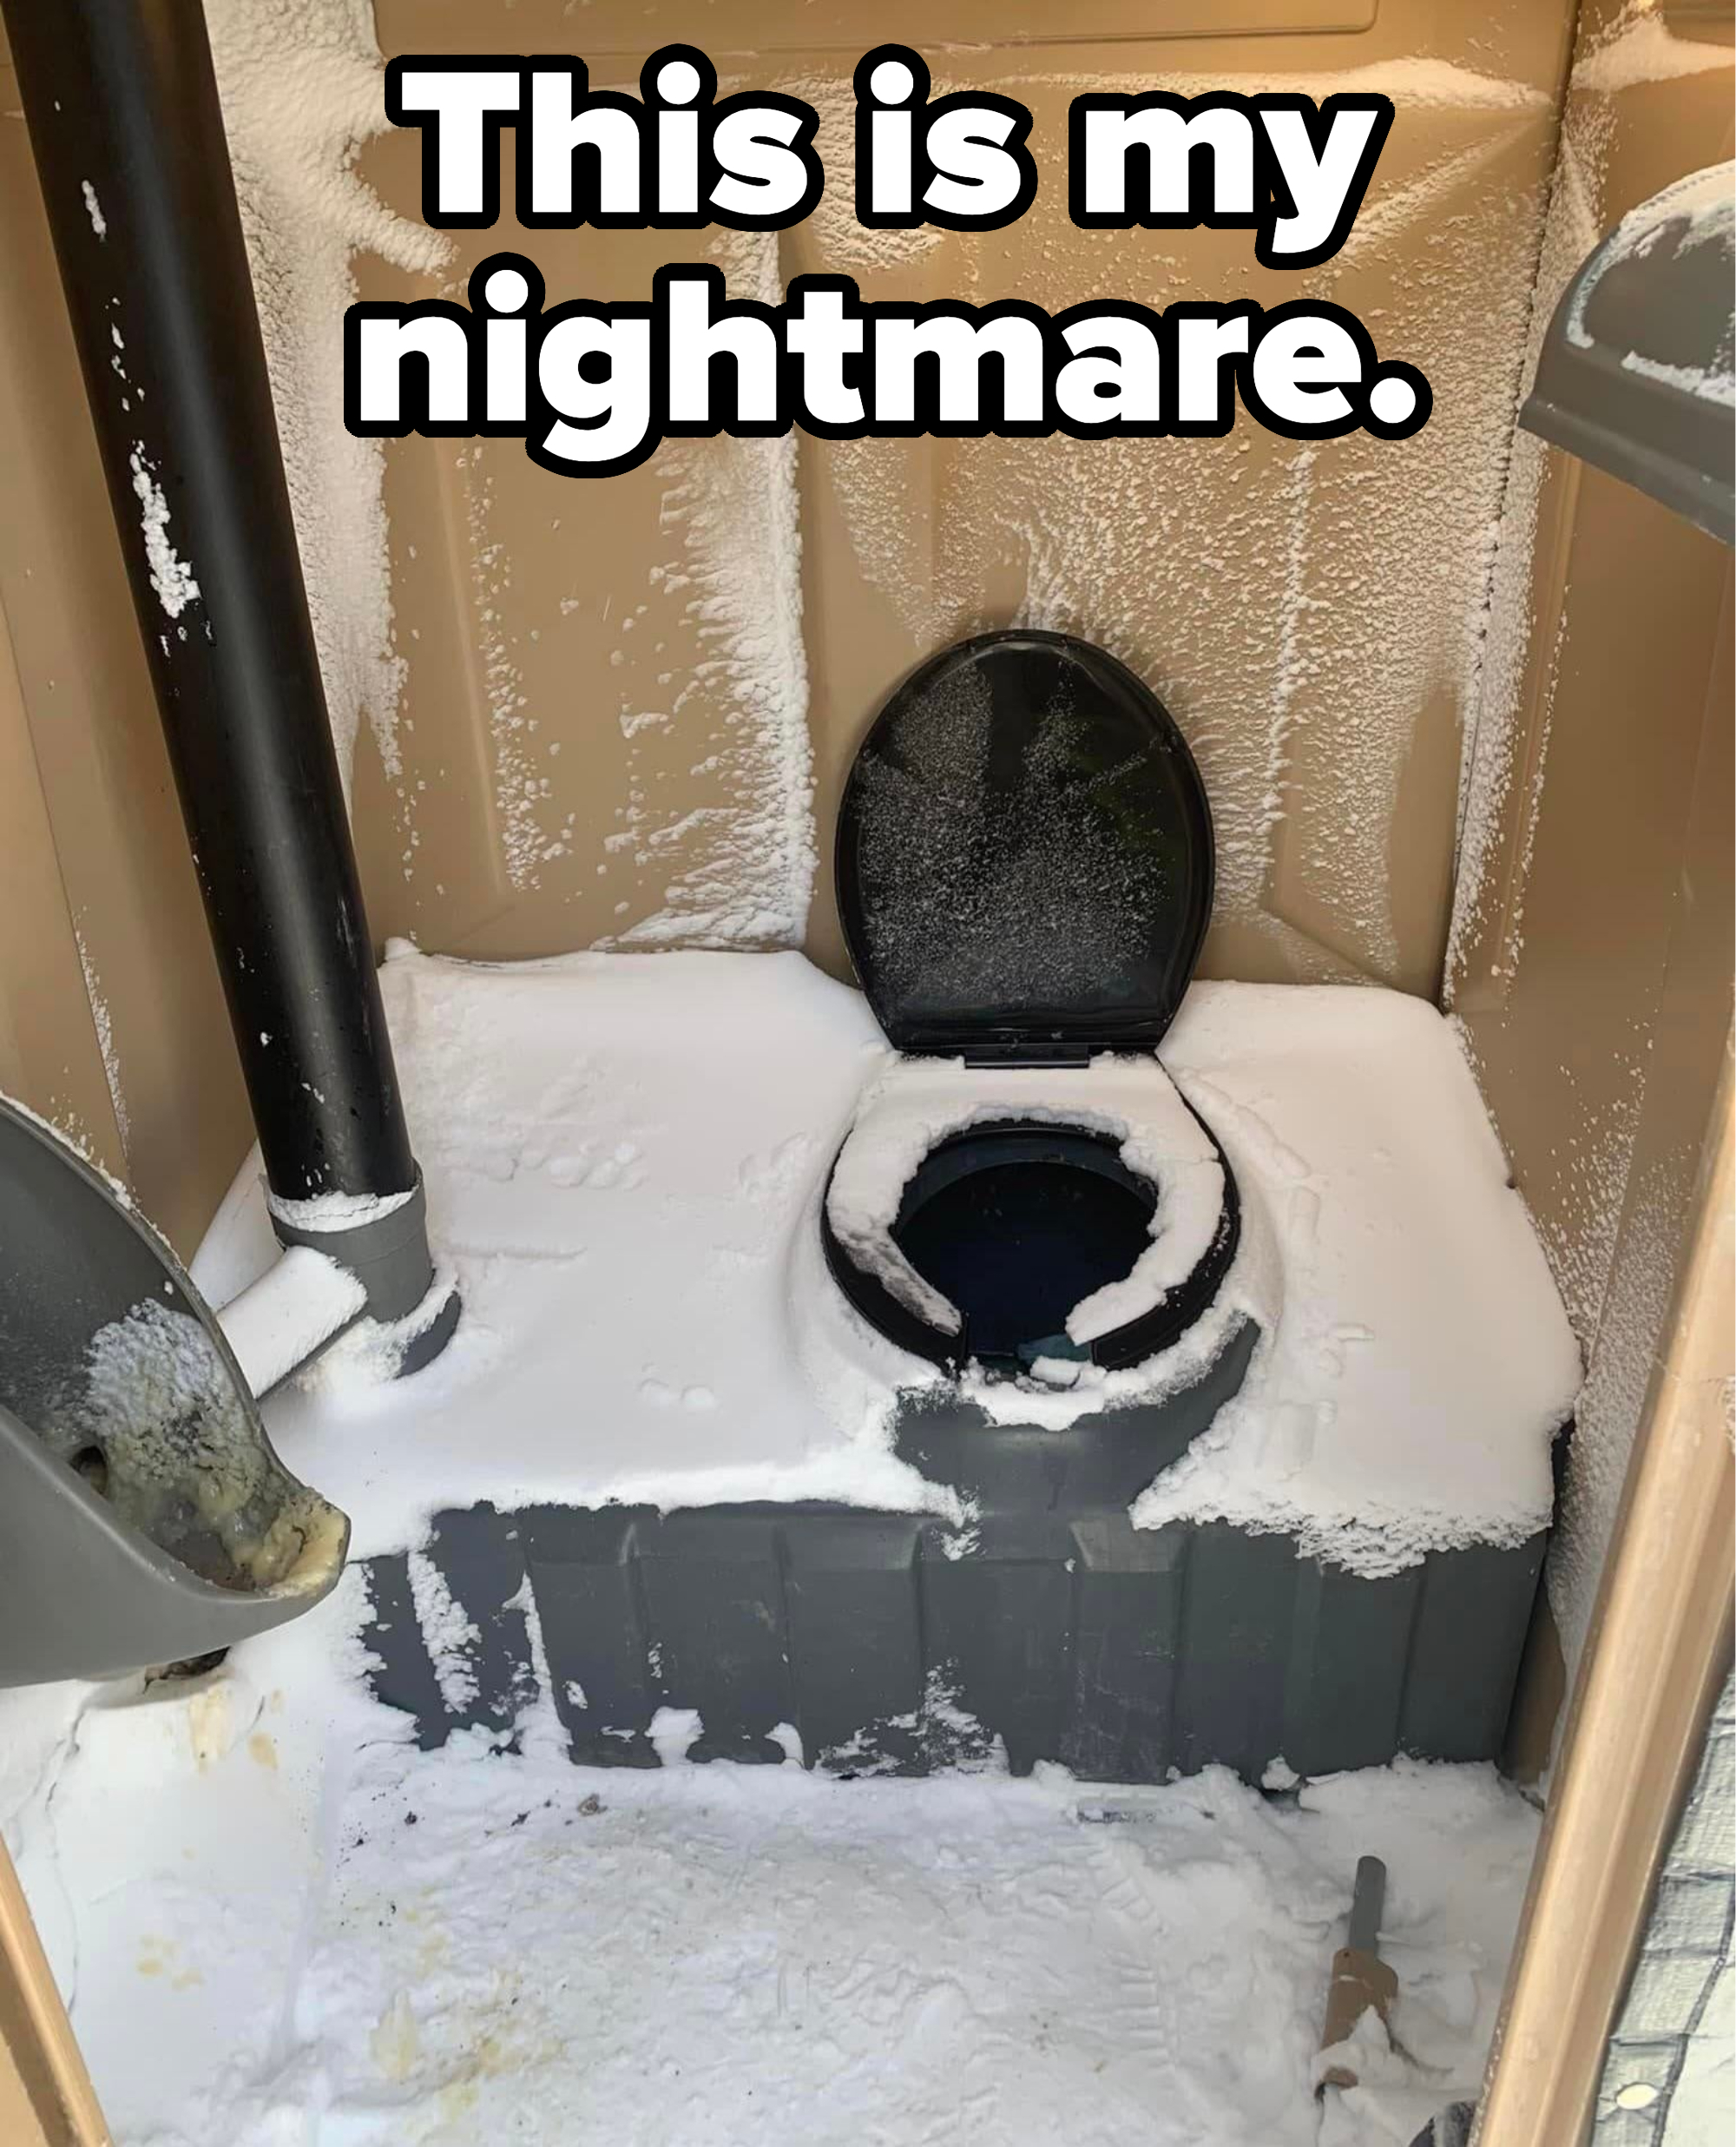 &quot;This is my nightmare&quot;: An outhouse interior with snow